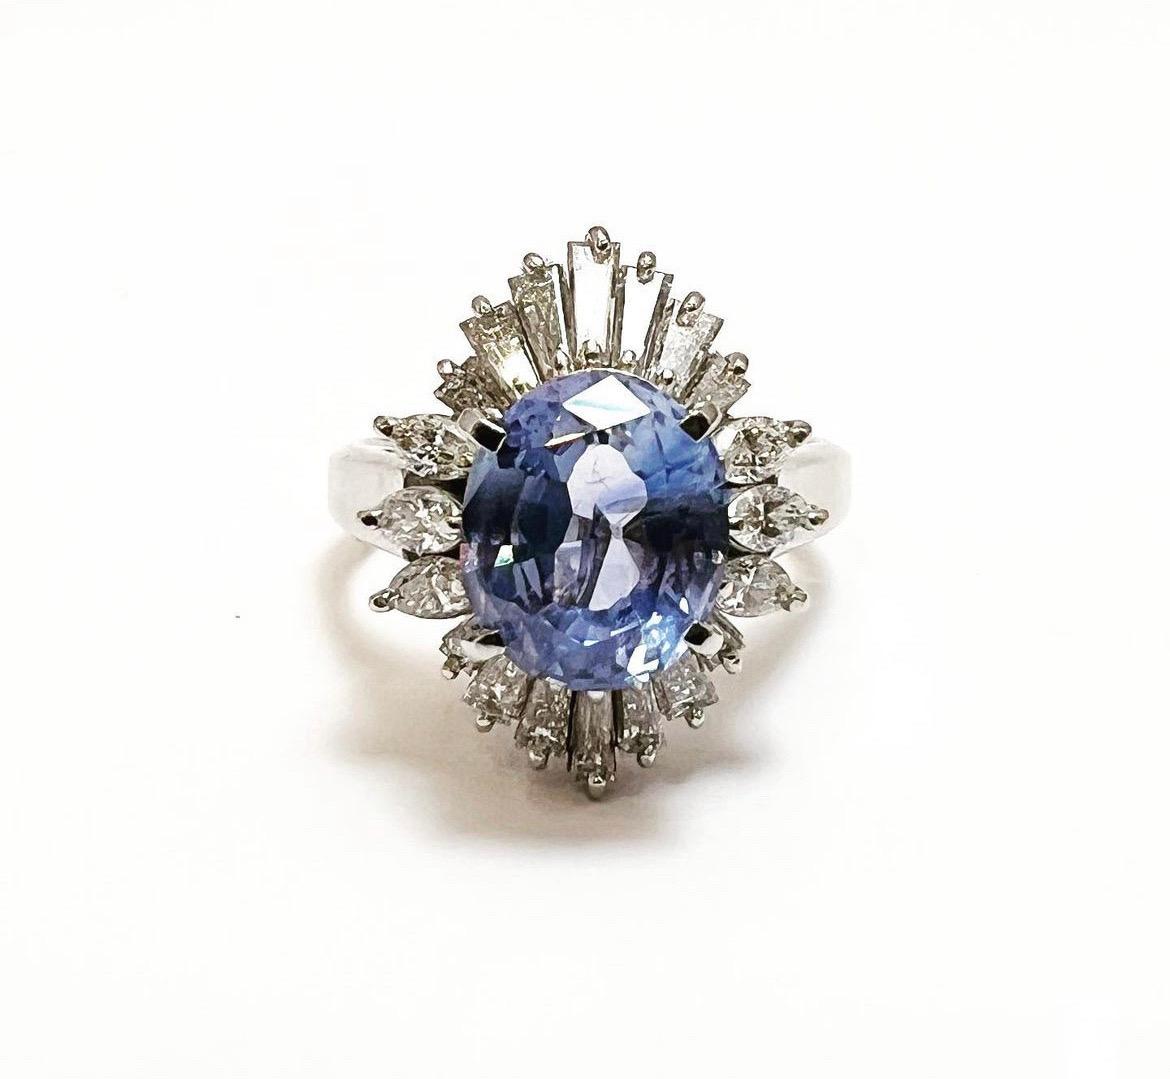 FREE SHIPPING AND RESIZING.
RETURNS ACCEPTED (3 days).

Amazing 1950s ,oval sapphire and diamonds halo platinum cluster engagement ring.
A classically designed platinum ring an oval blue sapphire surrounded by trapezoid and marquis diamonds. 
Metal: